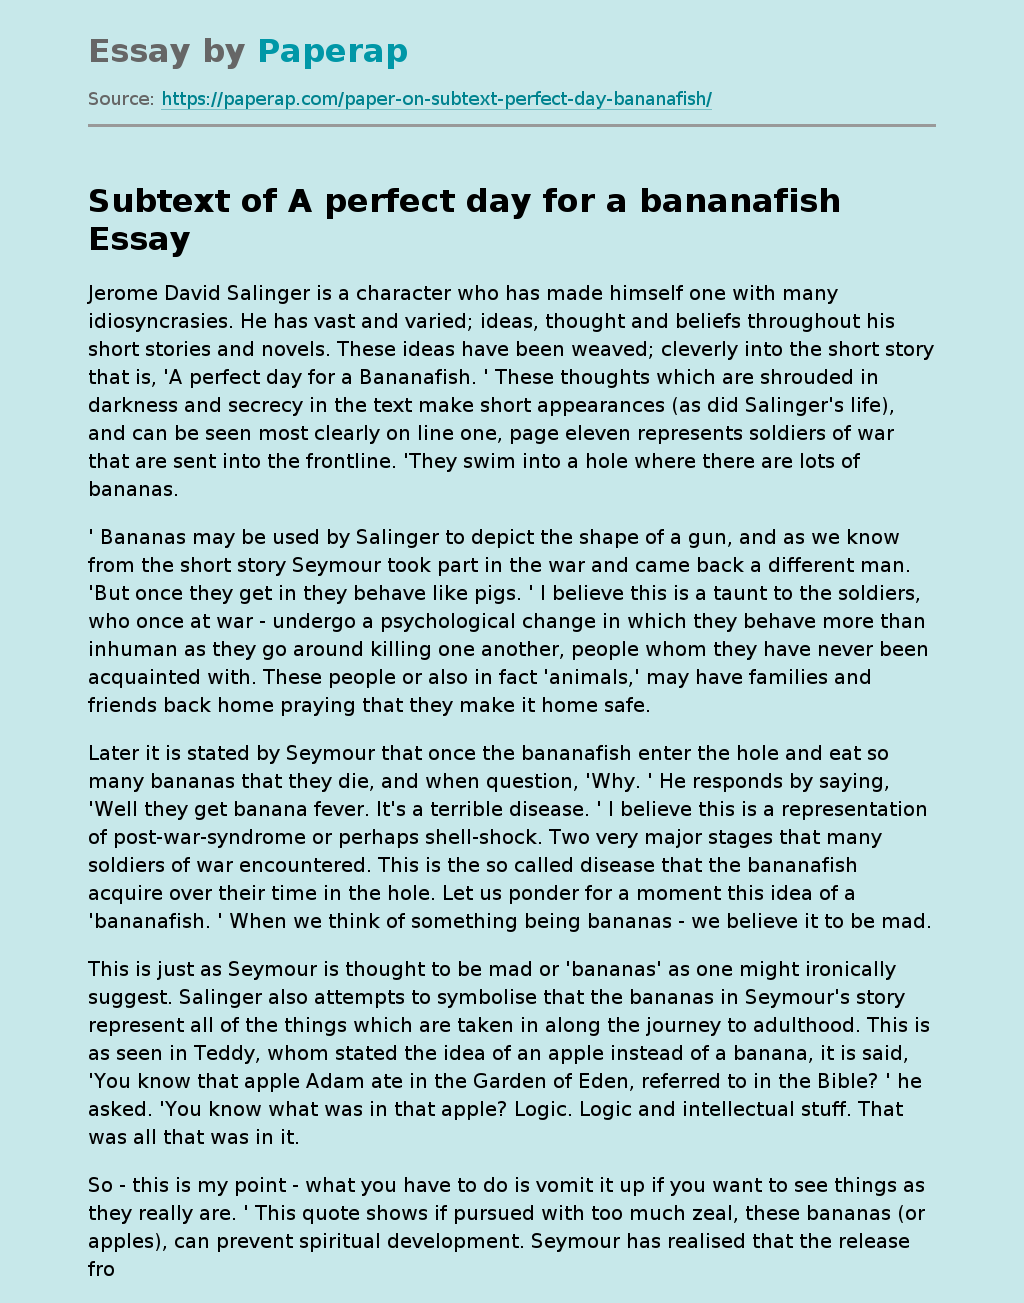 Subtext of A perfect day for a bananafish